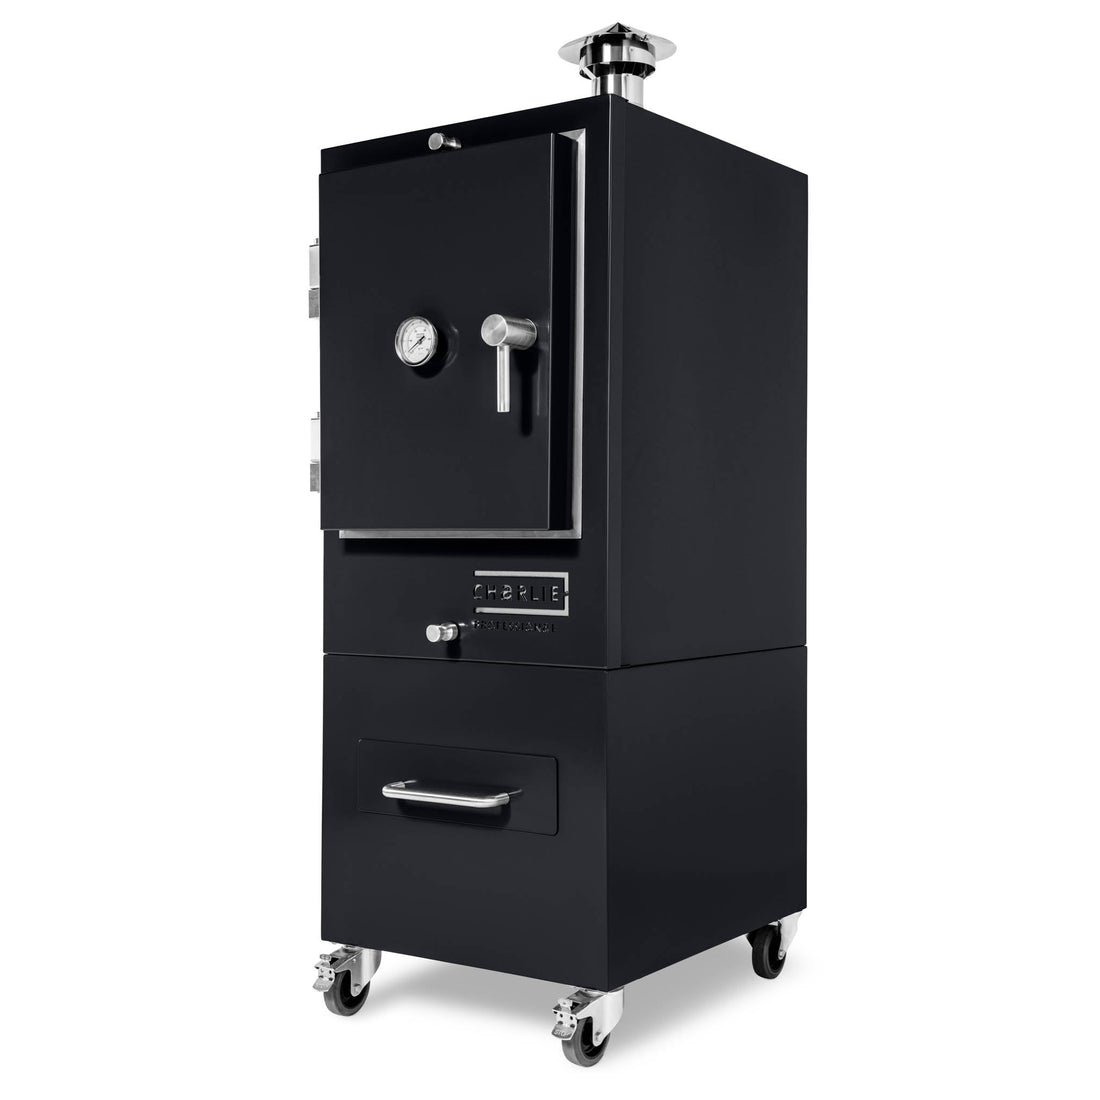 Professional Charlie Charcoal Oven - Black Peppercorn - Charlie Oven